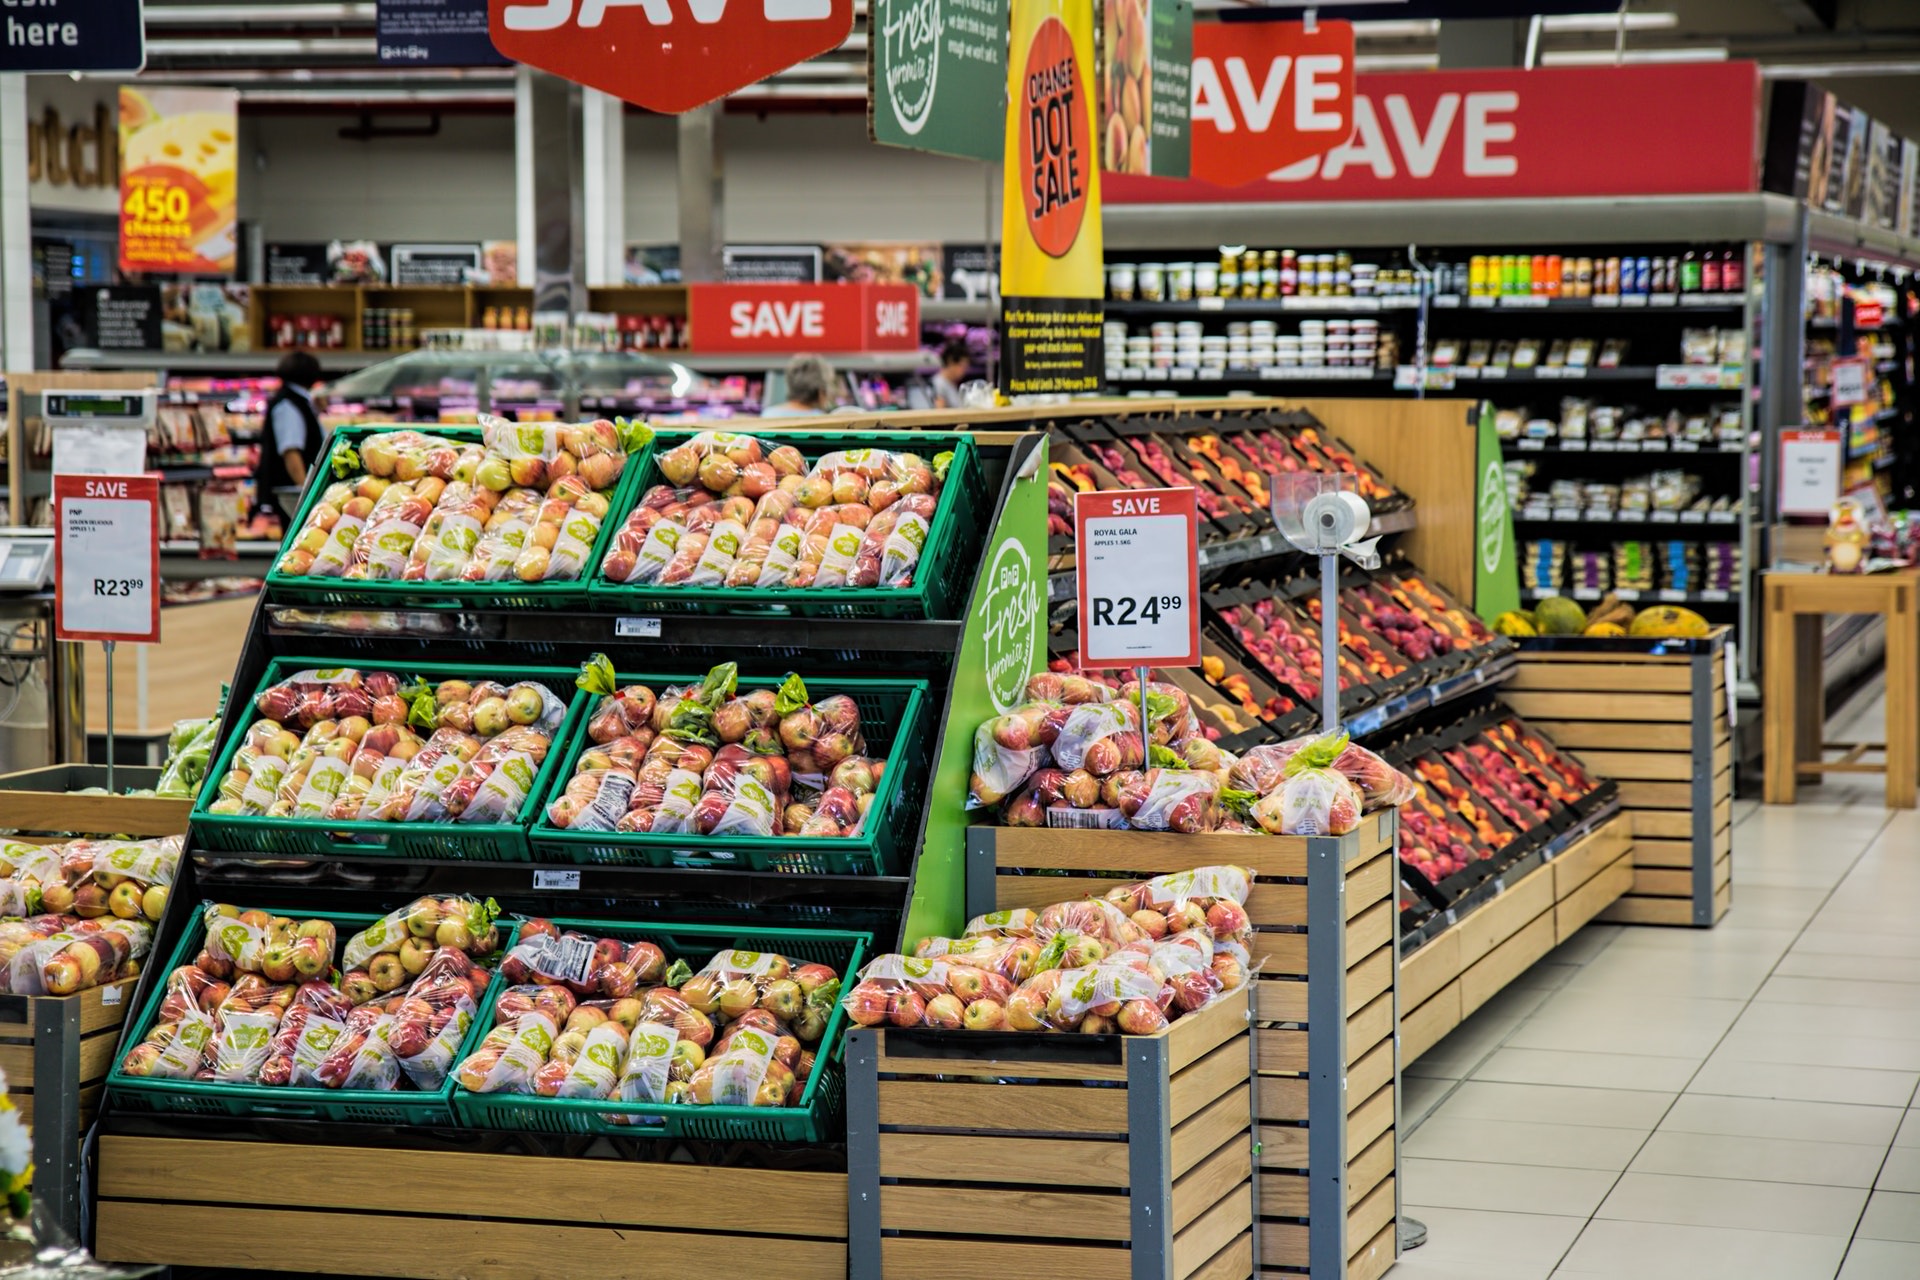 An image of fruit stands at a grocery store.